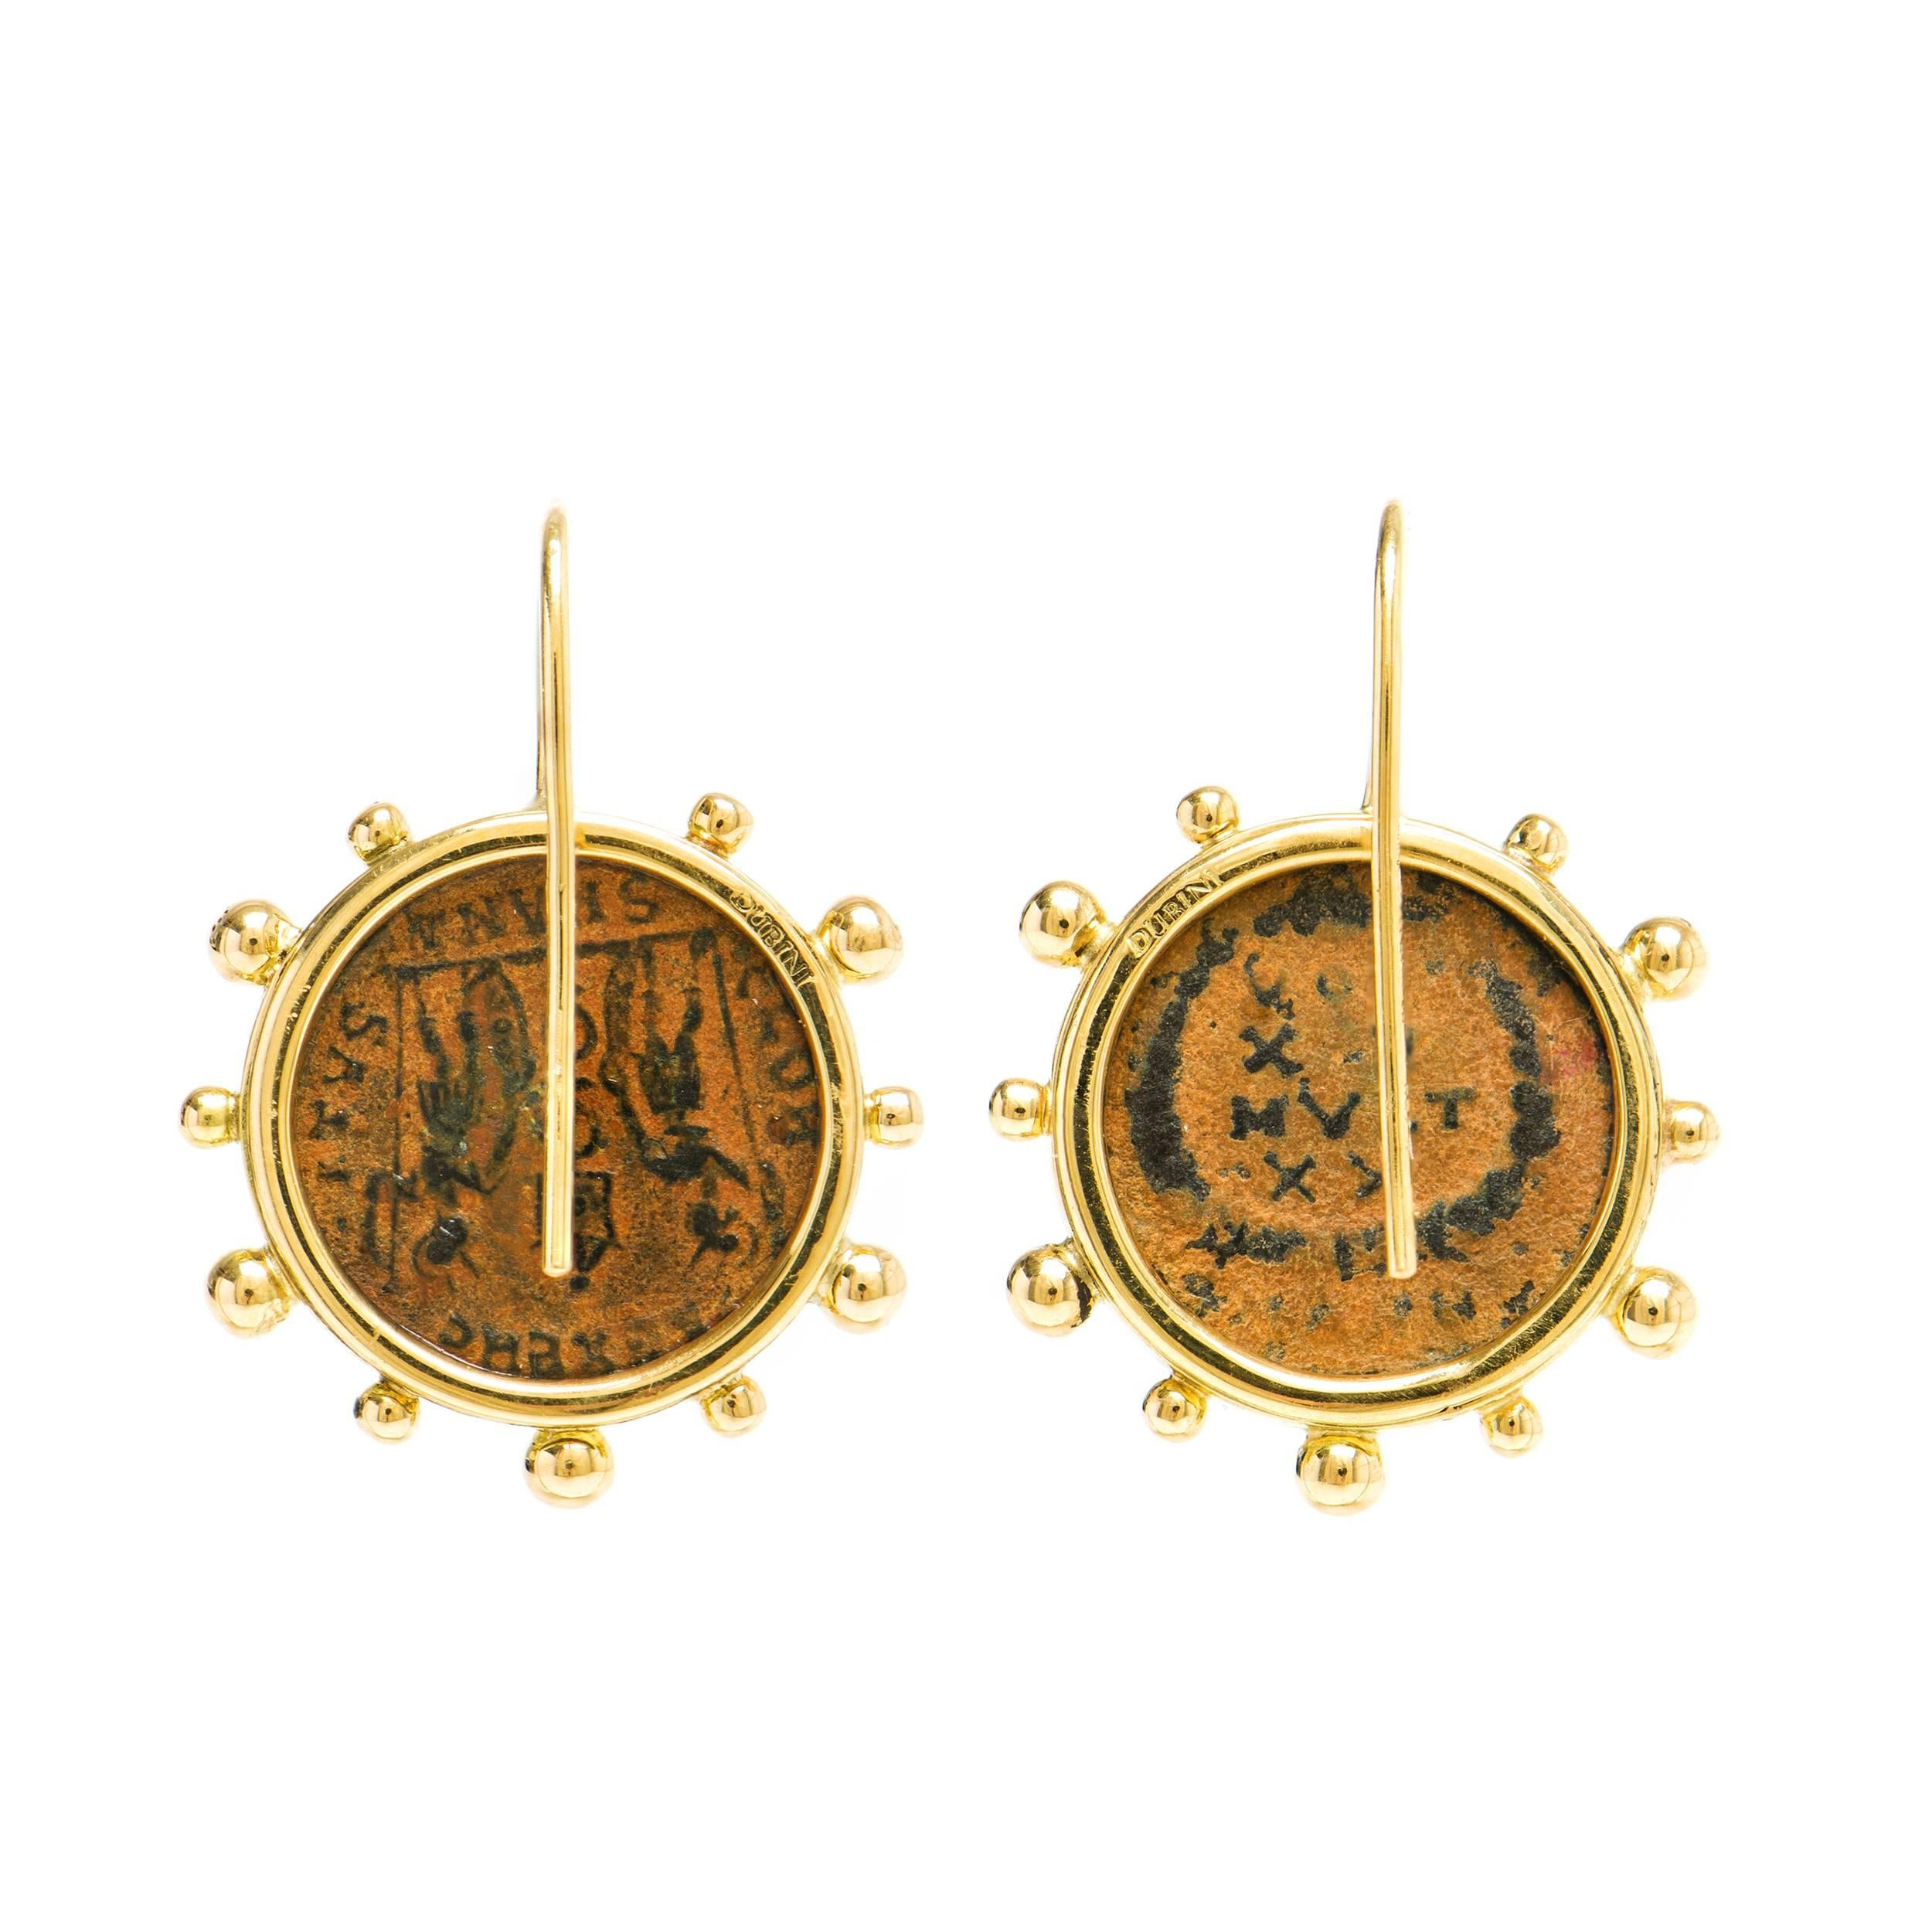 These Dubini coin earrings from the 'Empires' collection feature authentic Roman Imperial bronze coins set in 18K yellow gold.

ABOUT THE COINS

Patina is that beautiful and brilliant kind of time-created varnish, of a green or brownish colour,